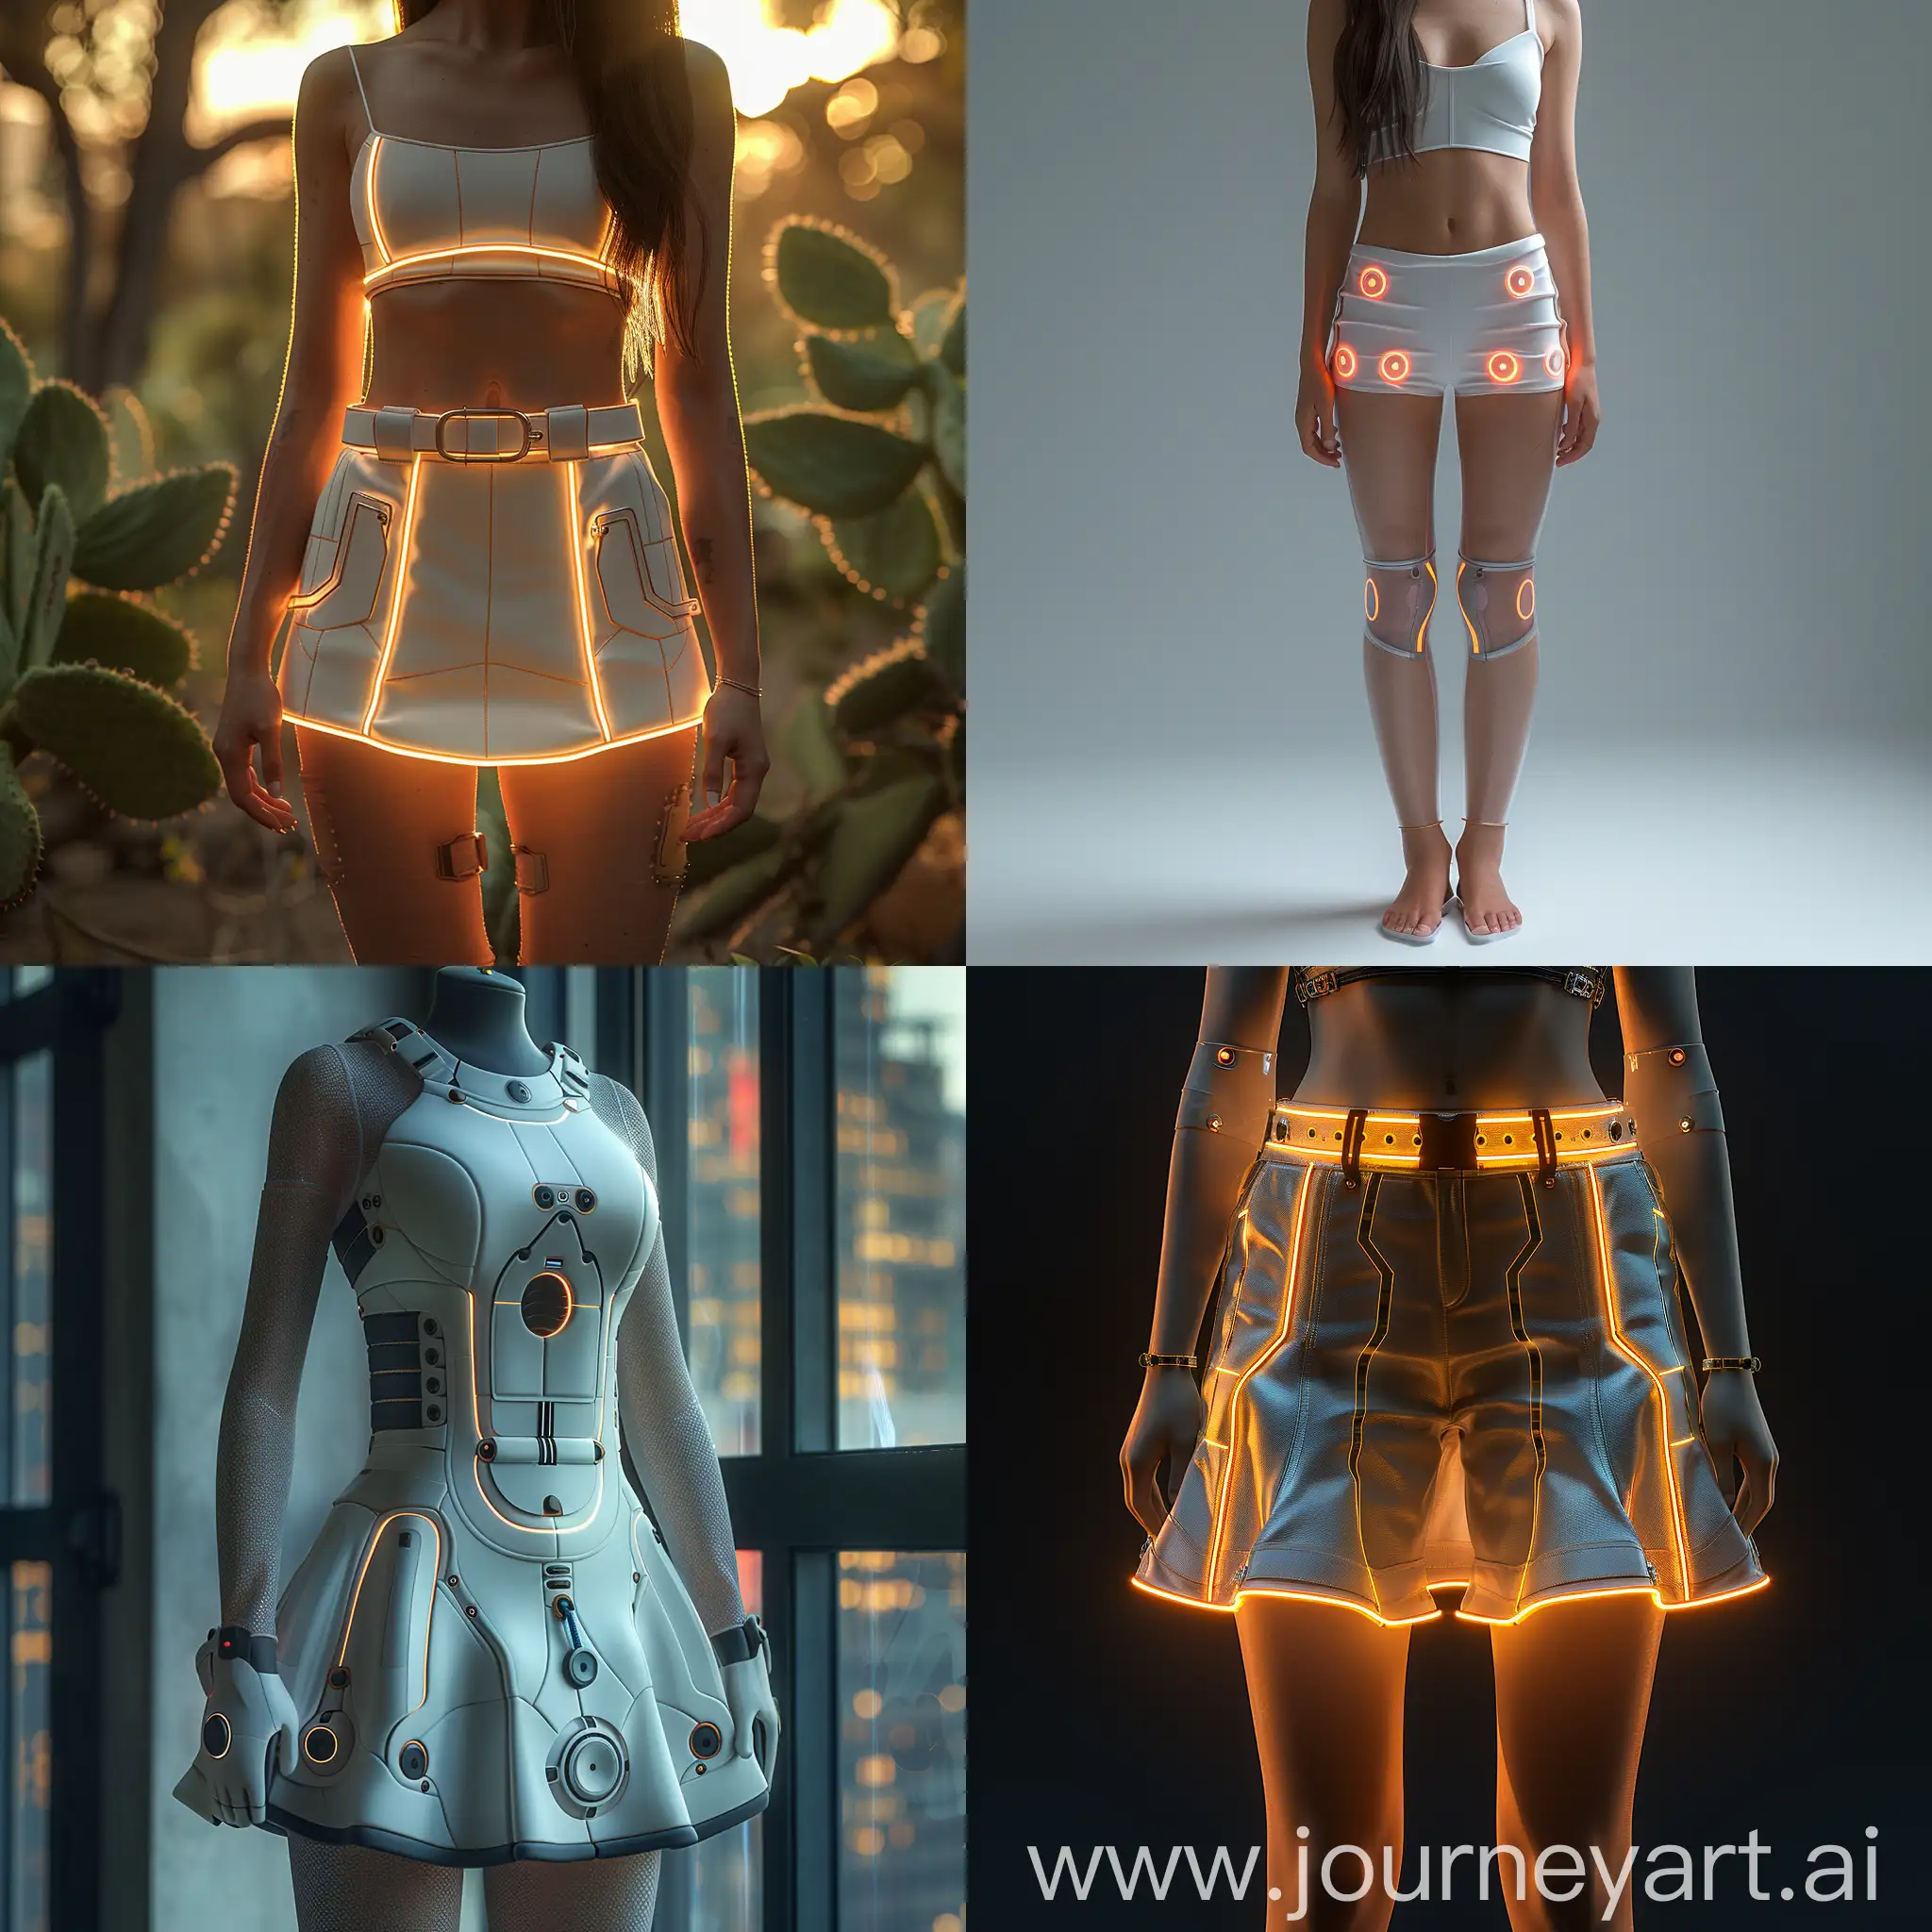 Futuristic mini skirt, Sustainable Materials, Biodegradable, Low-Impact Dyes, Zero Waste Design, Energy-Efficient Production, Fair Trade, Recycled Trimmings, Minimal Packaging, Longevity, Transparency, Smart Fabrics, Embedded Sensors, LED Lighting, Wireless Charging, Augmented Reality (AR) Enhancement, Climate Control, Sound Integration, Gesture Control, UV Protection, Self-Cleaning, Pocket Charger, Bluetooth Connectivity, Mini Speakers, Fitness Tracker, GPS Navigation, Camera, Emergency Alarm, Heating and Cooling System, Digital Display, Remote Control, octane render --stylize 1000